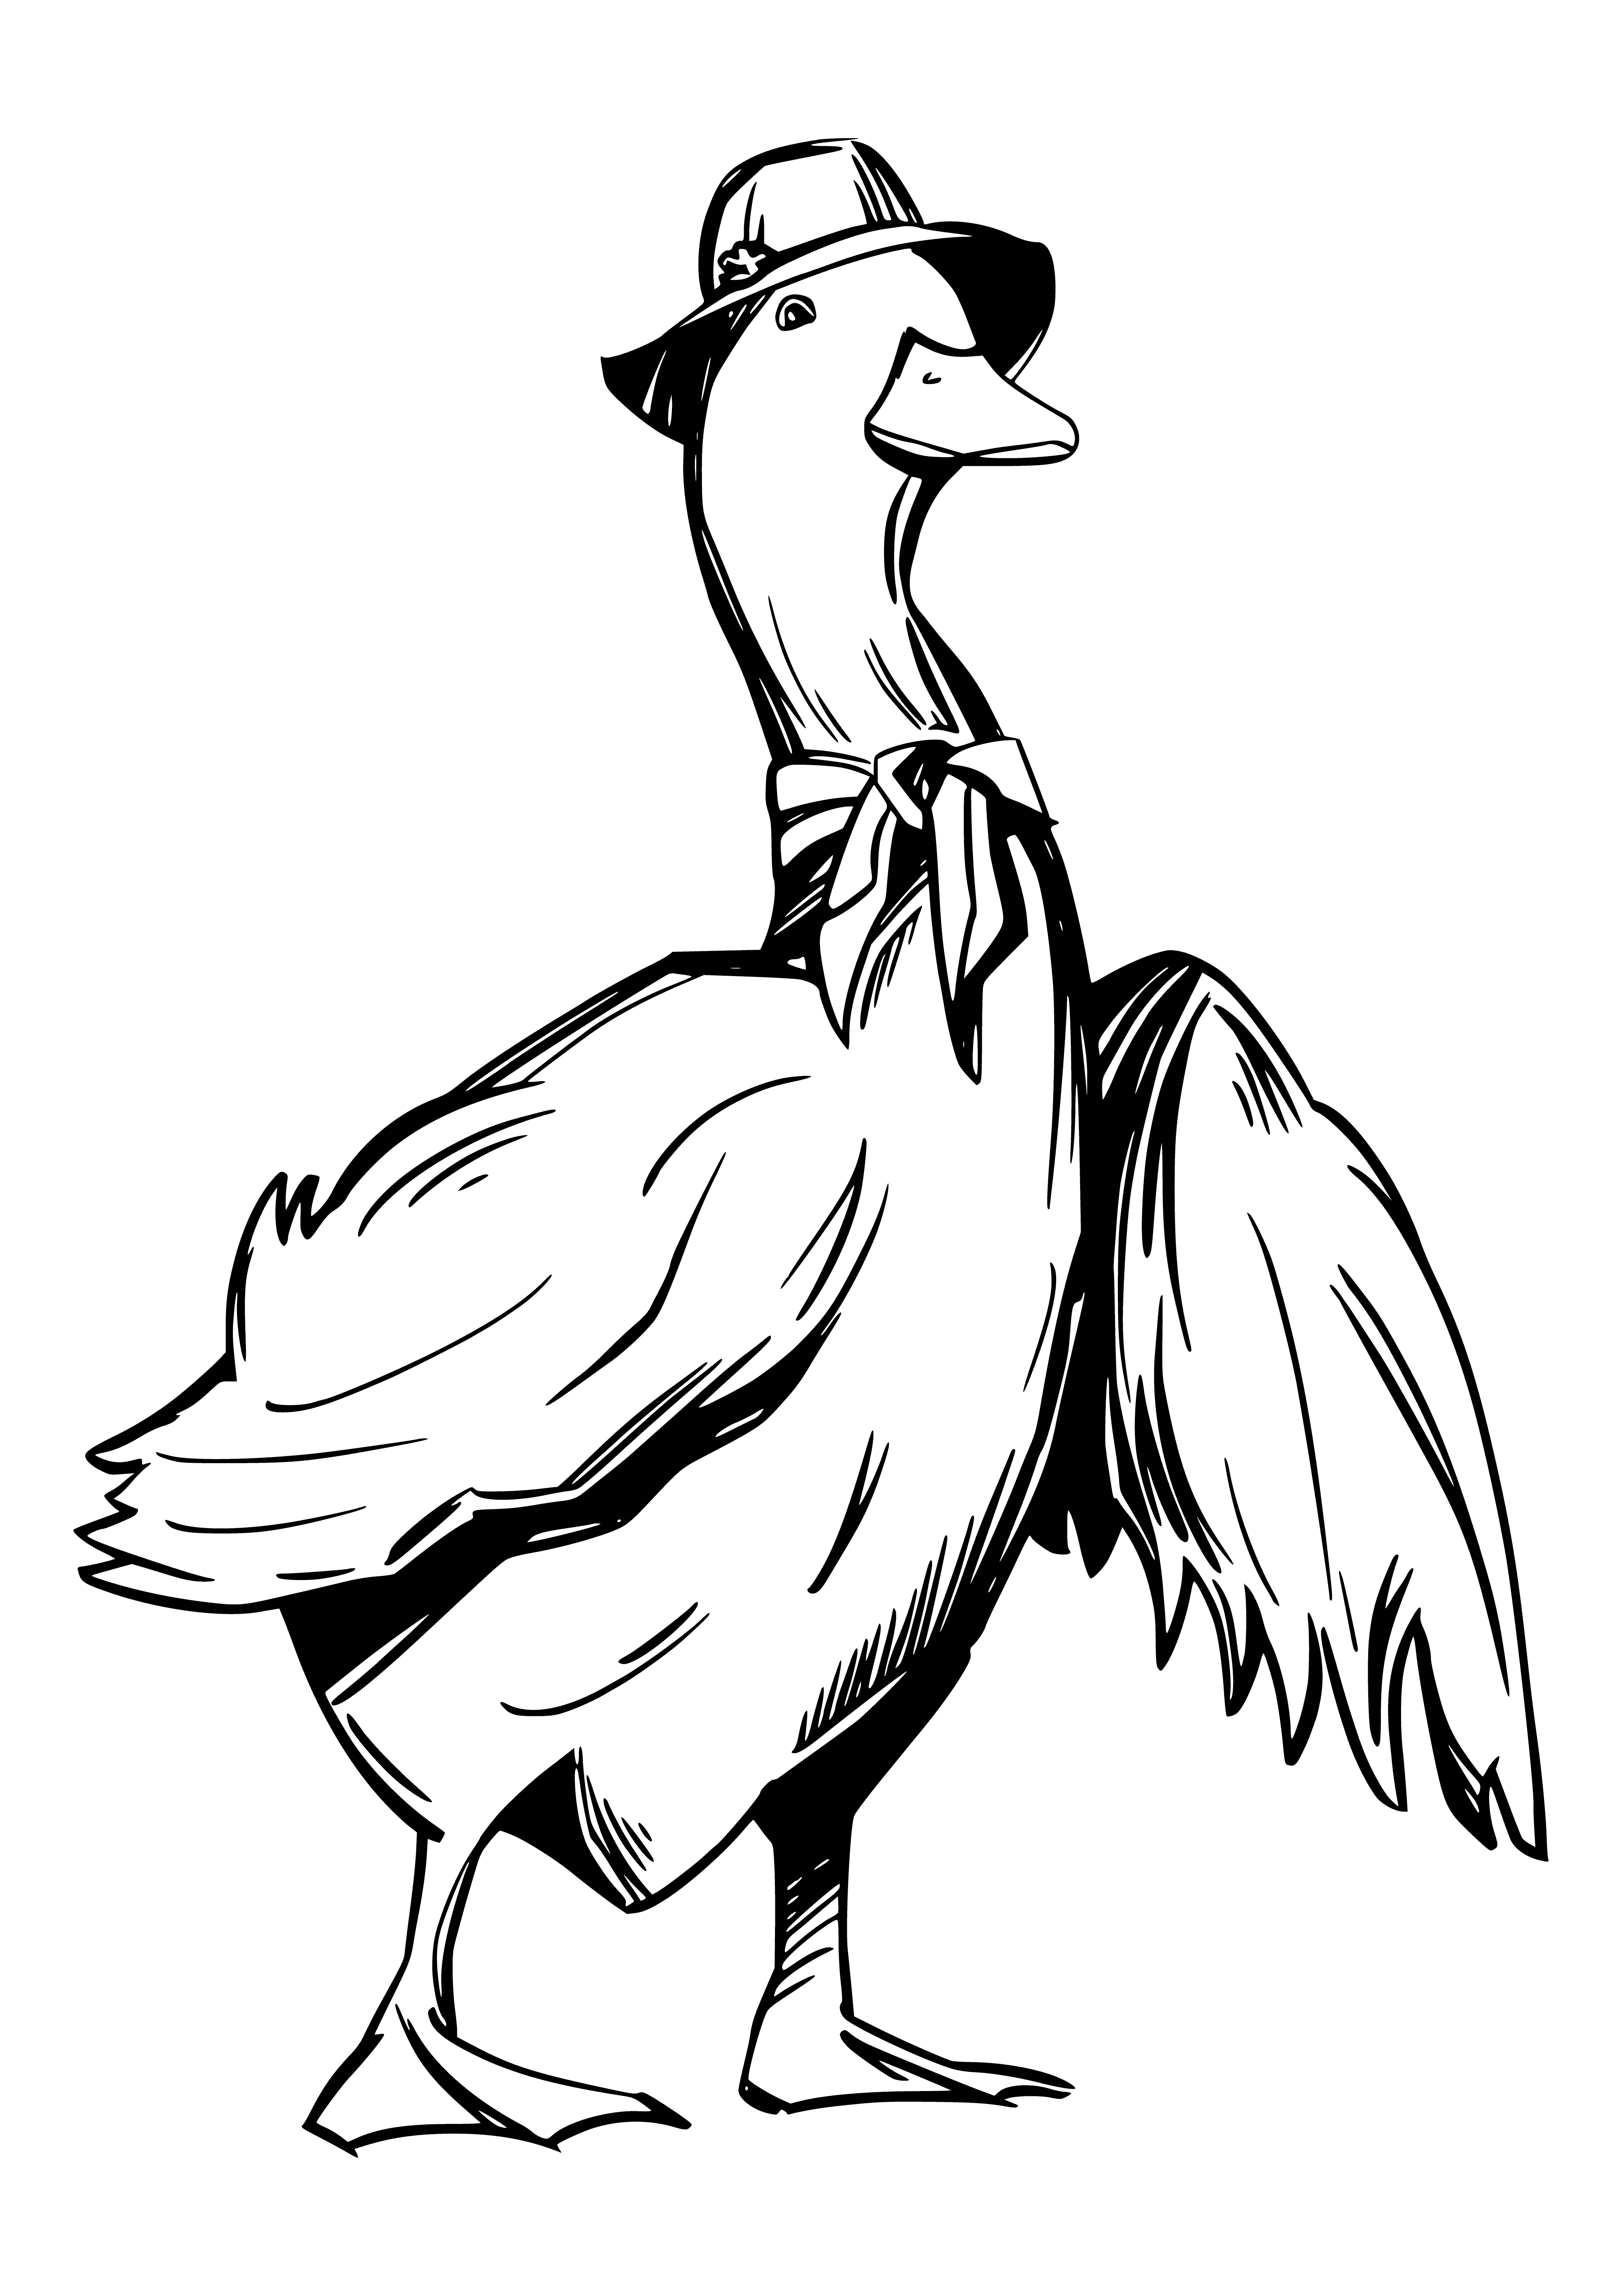 Jemima duck coloring page